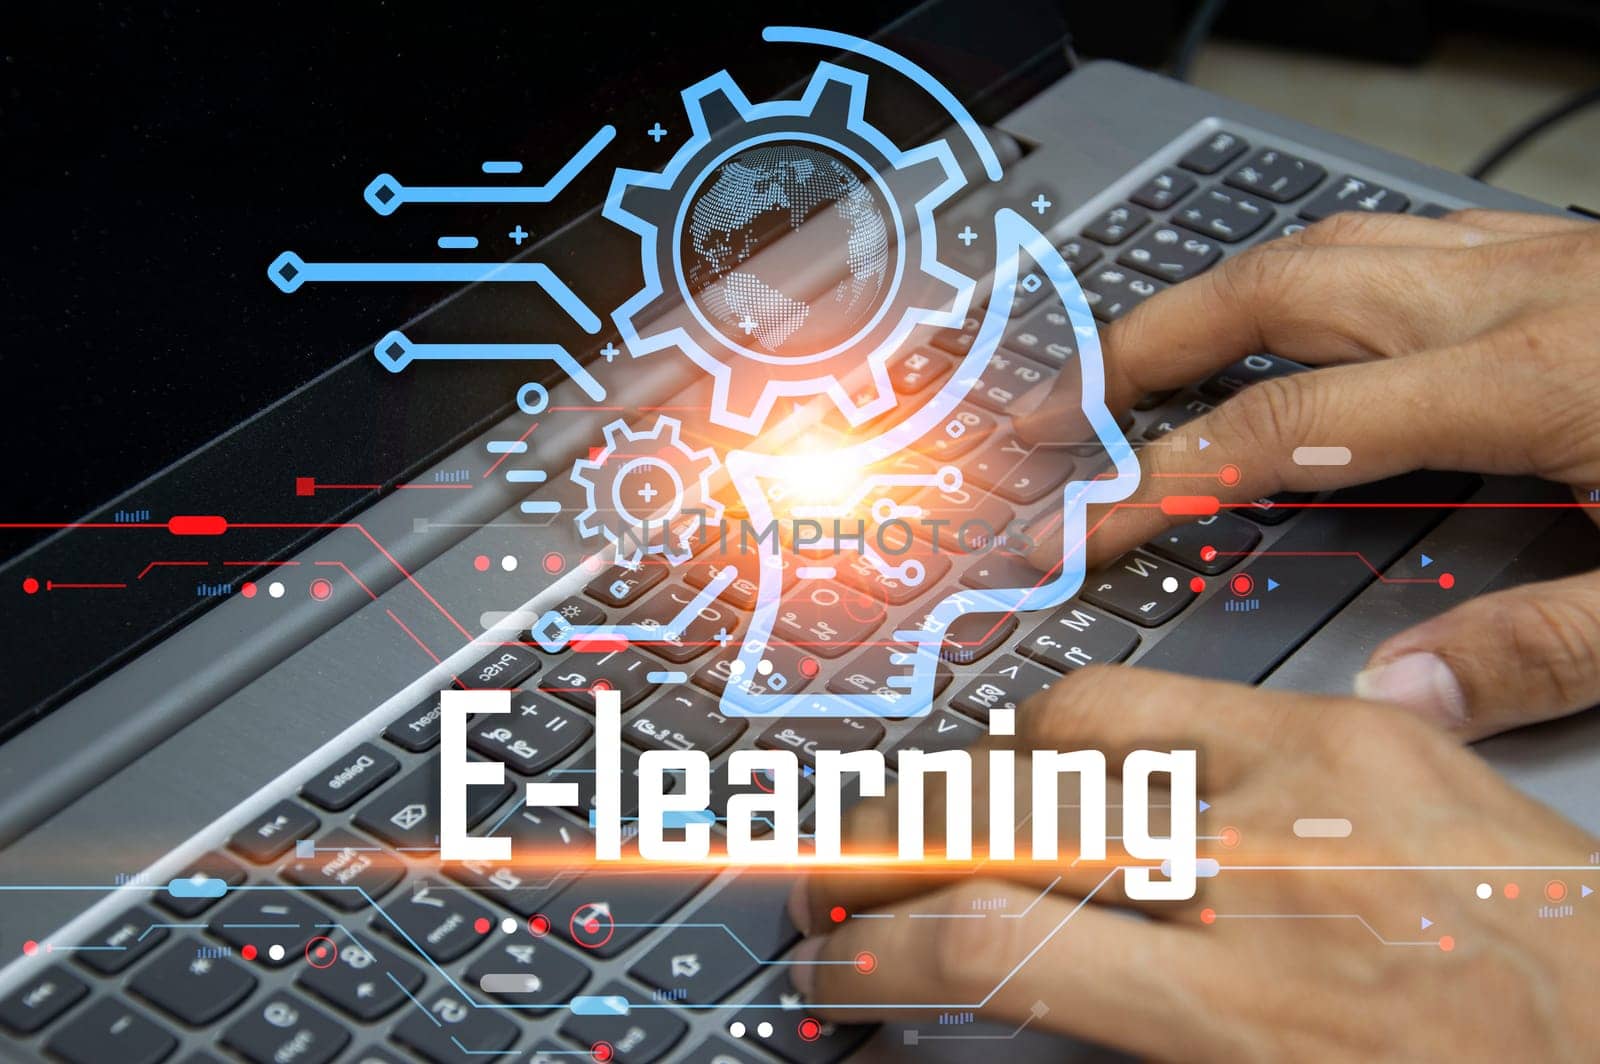 Concept of e-Learning, a learning management system through a network with an emphasis on learners as the center. in teaching and learning Blended style with regular class,stem	